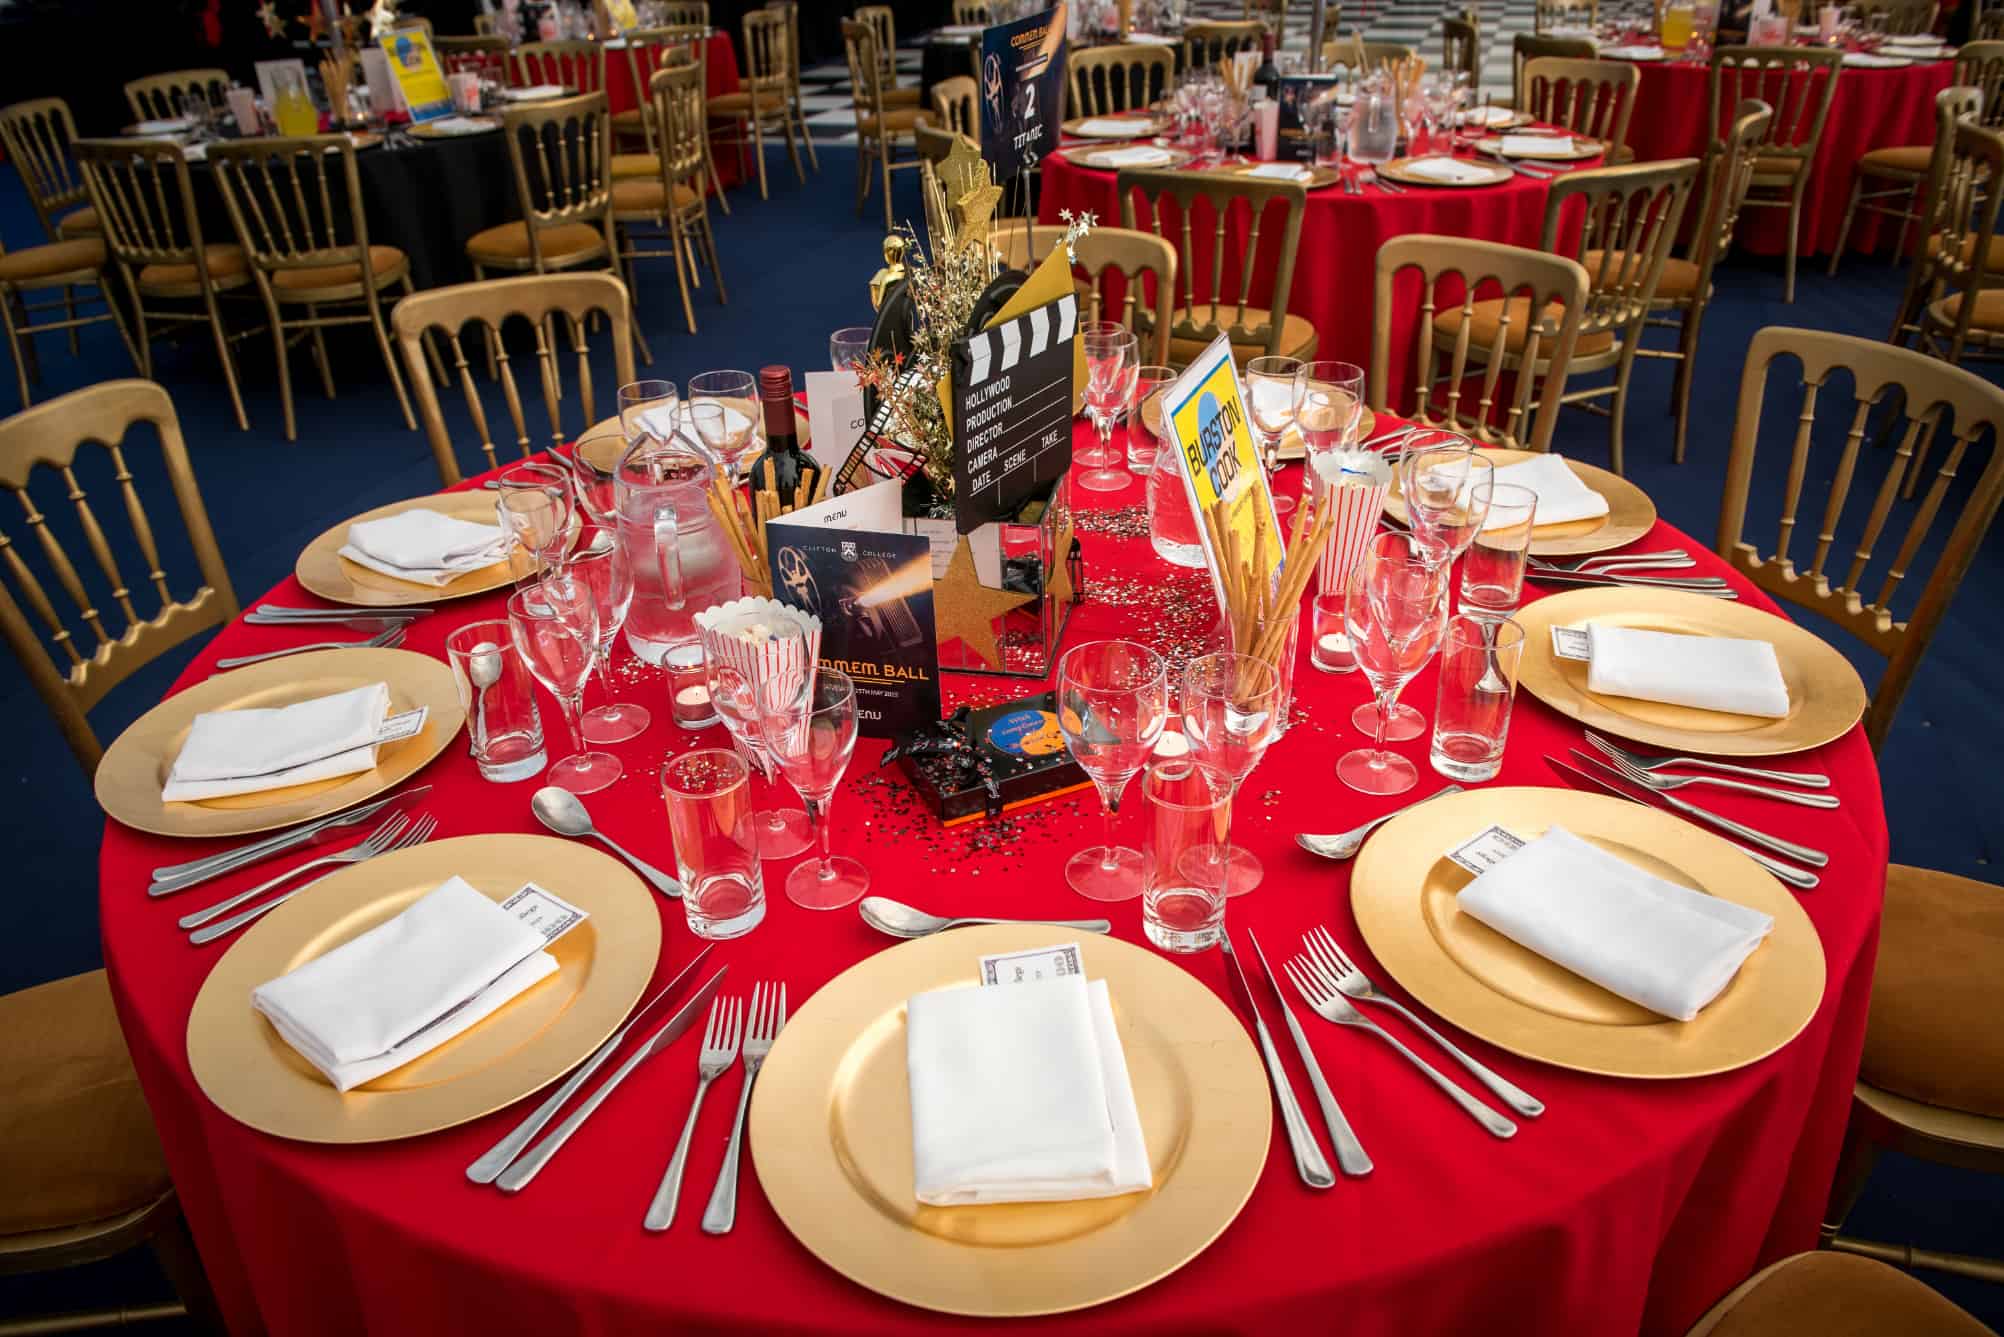 Red and gold table settings